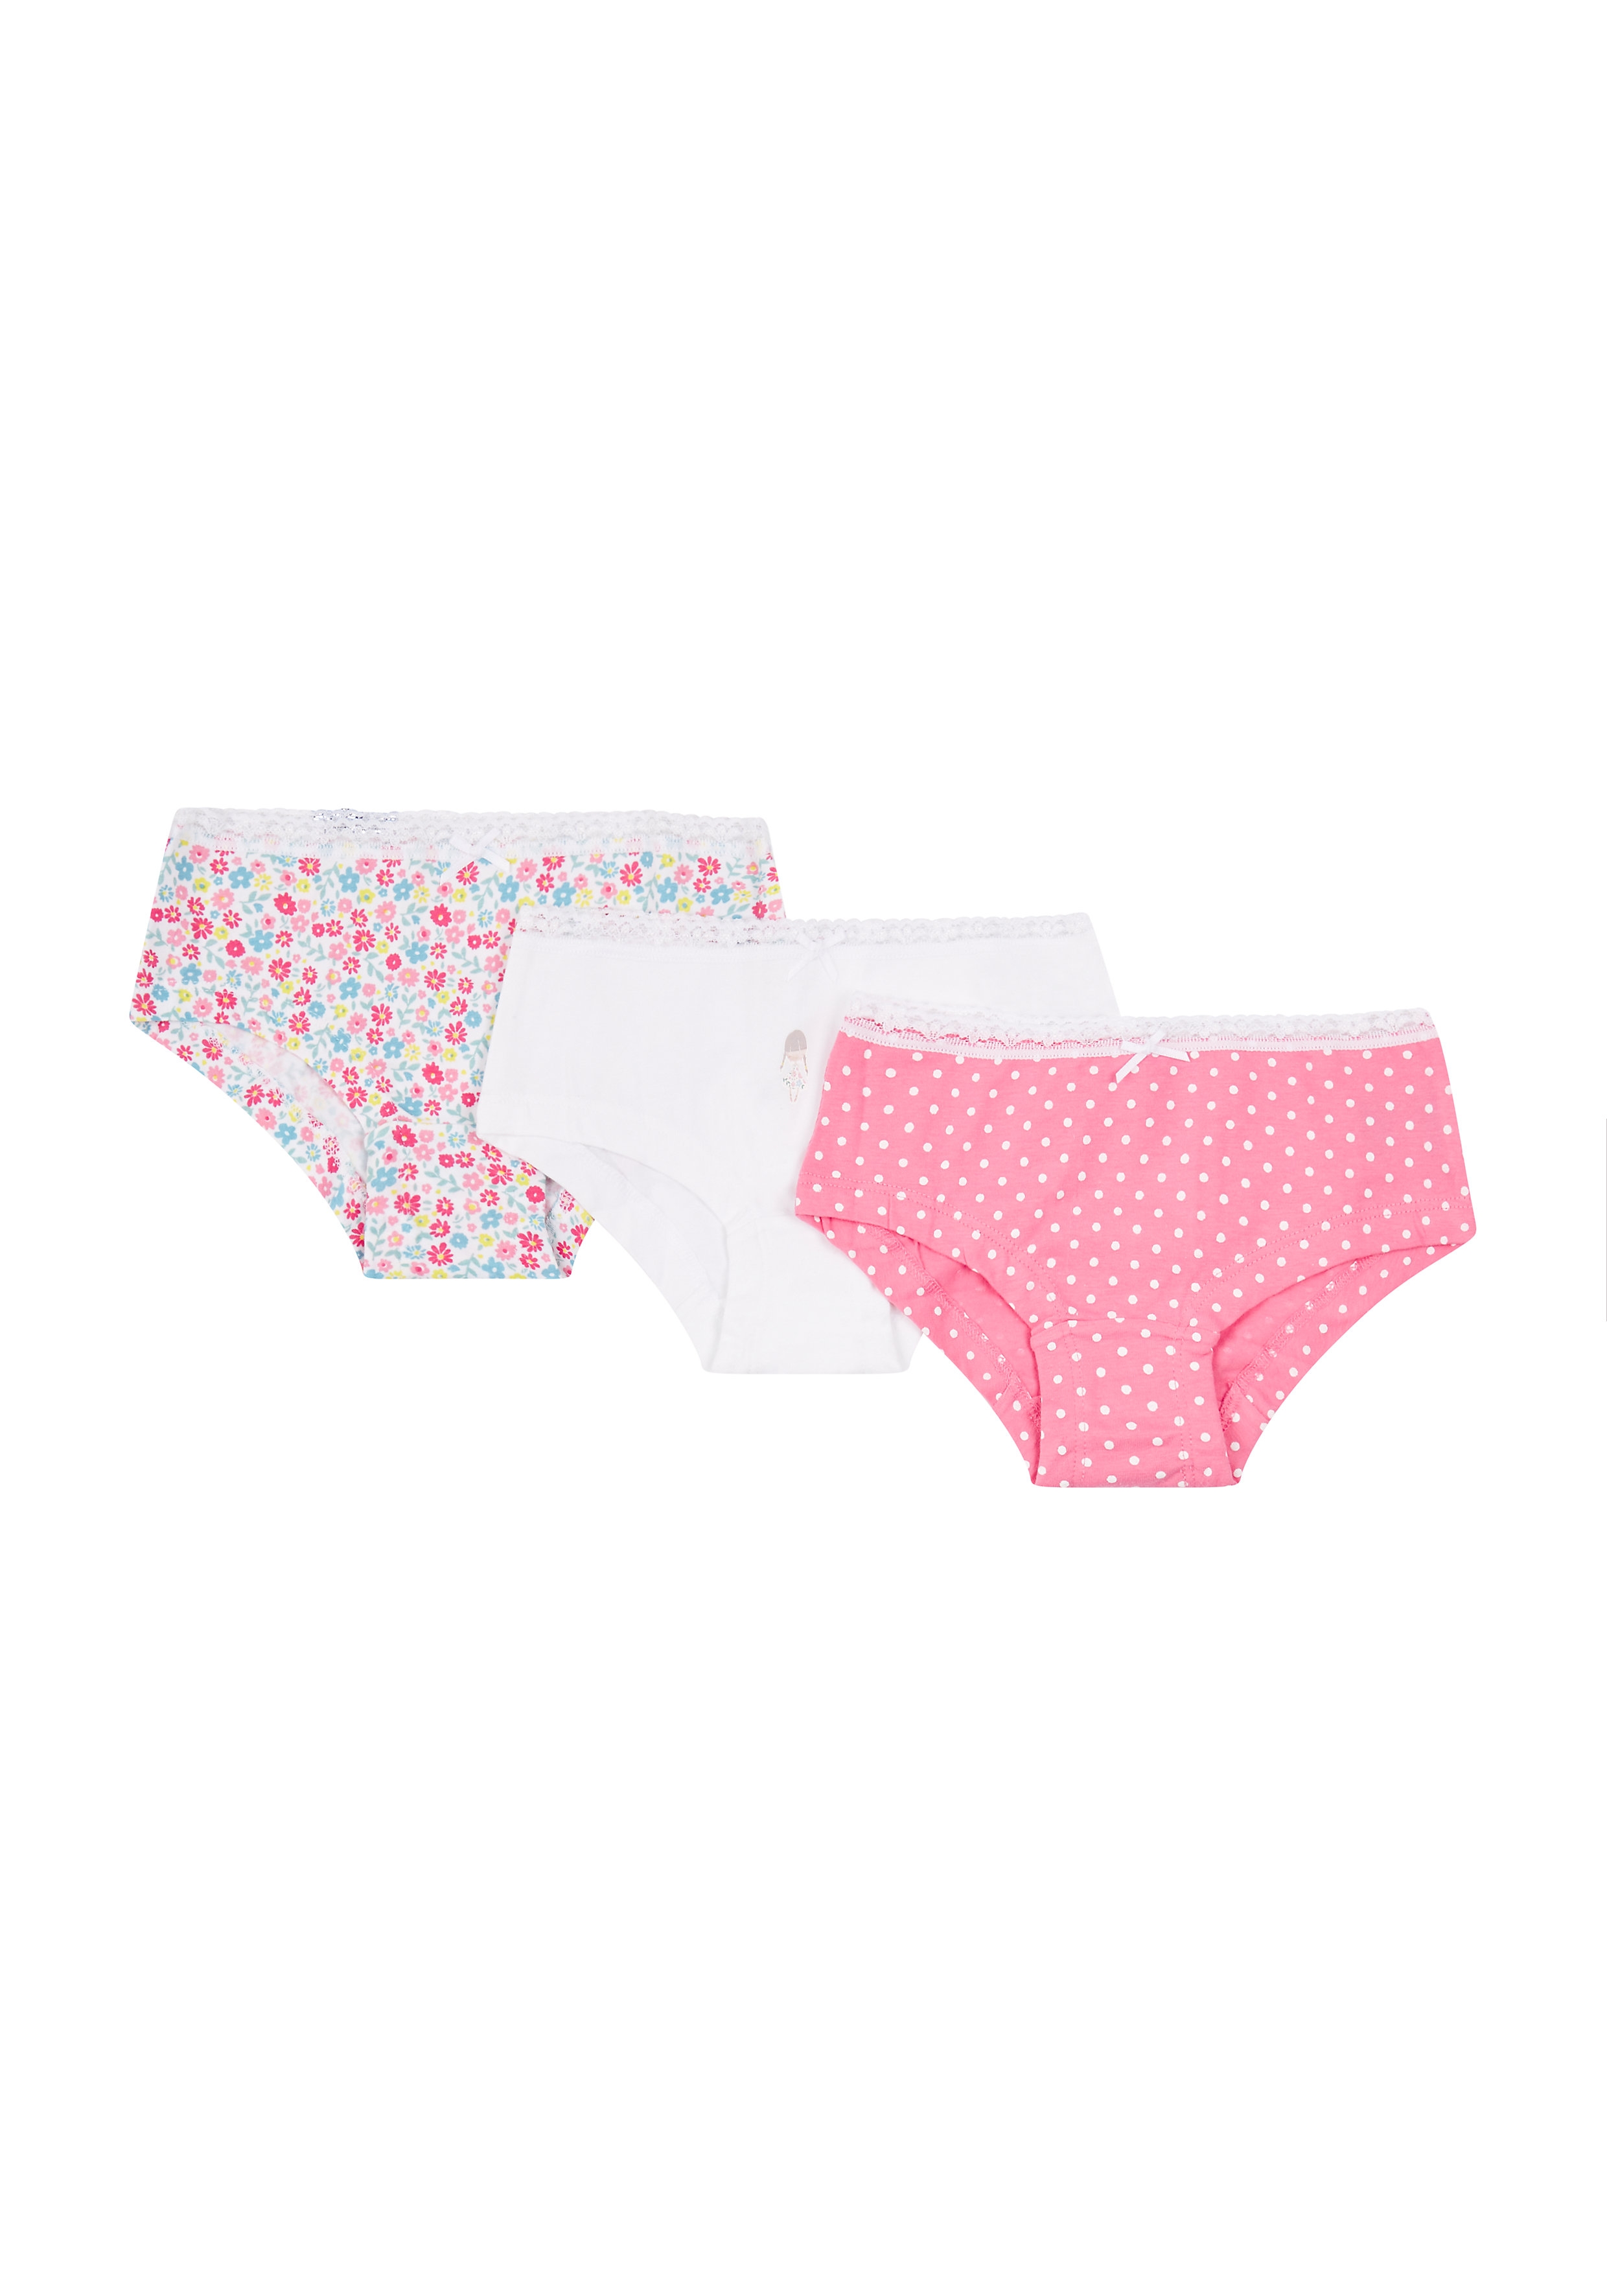 Mothercare | Girls Briefs Floral Print - Pack Of 3 - Pink